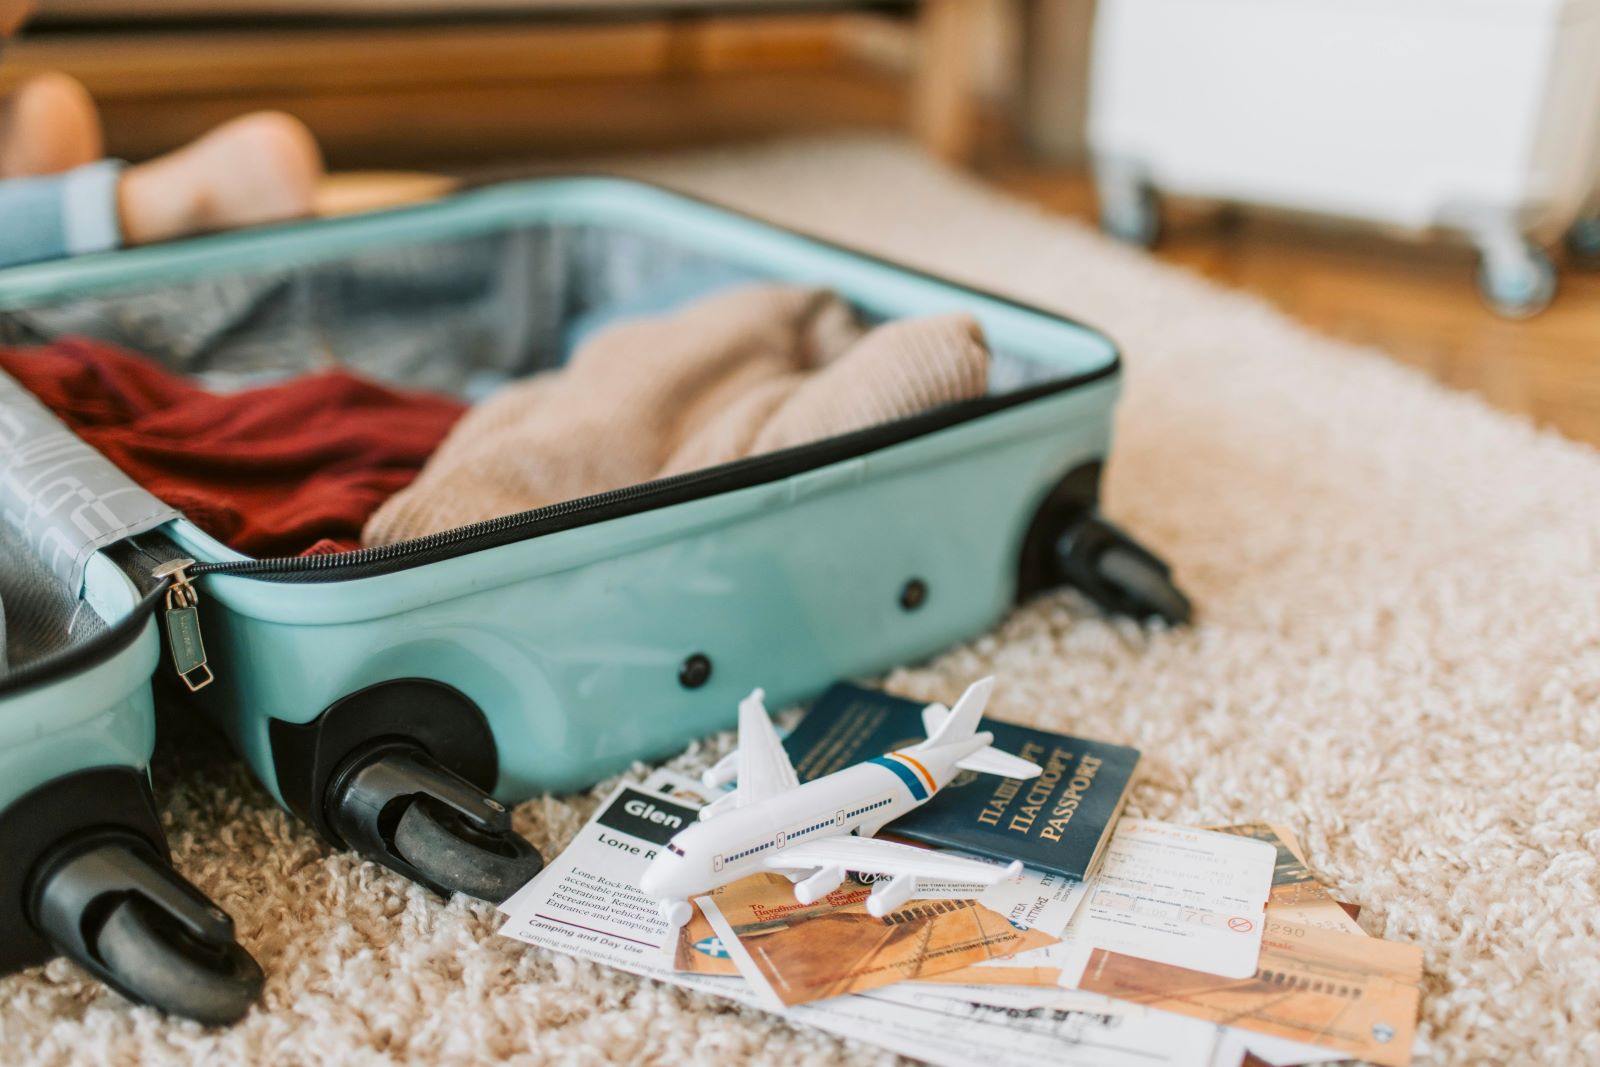 An unpacked suitcase and passport following a sabbatical